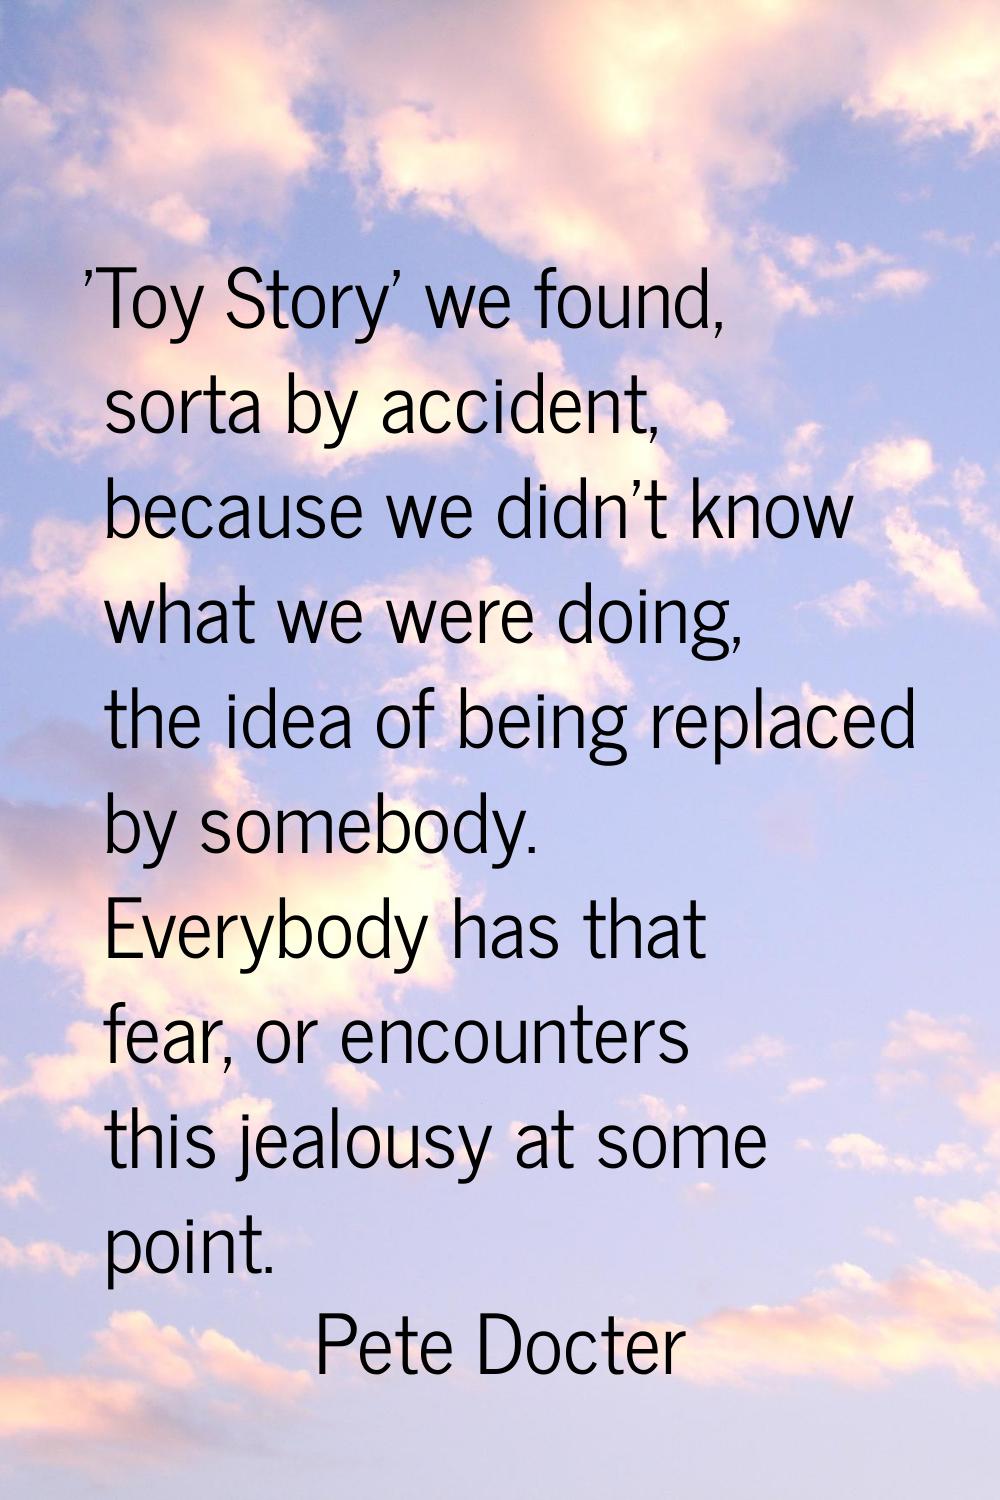 'Toy Story' we found, sorta by accident, because we didn't know what we were doing, the idea of bei